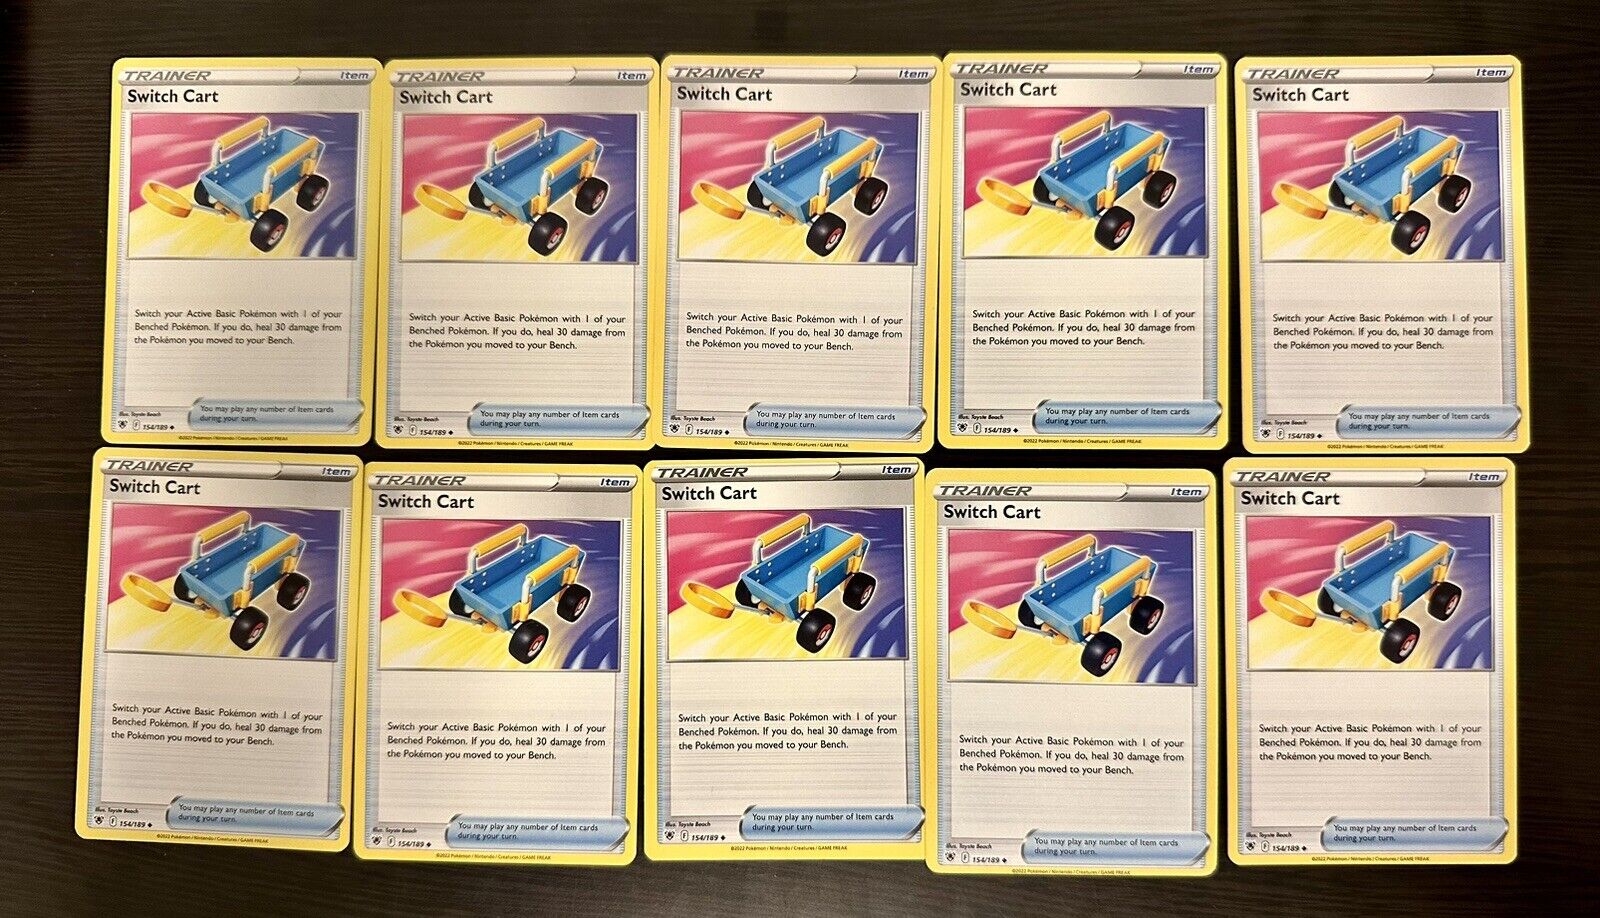 Pokemon Switch Cart 154/189 Astral Radiance NM - 10 Total - Image 1